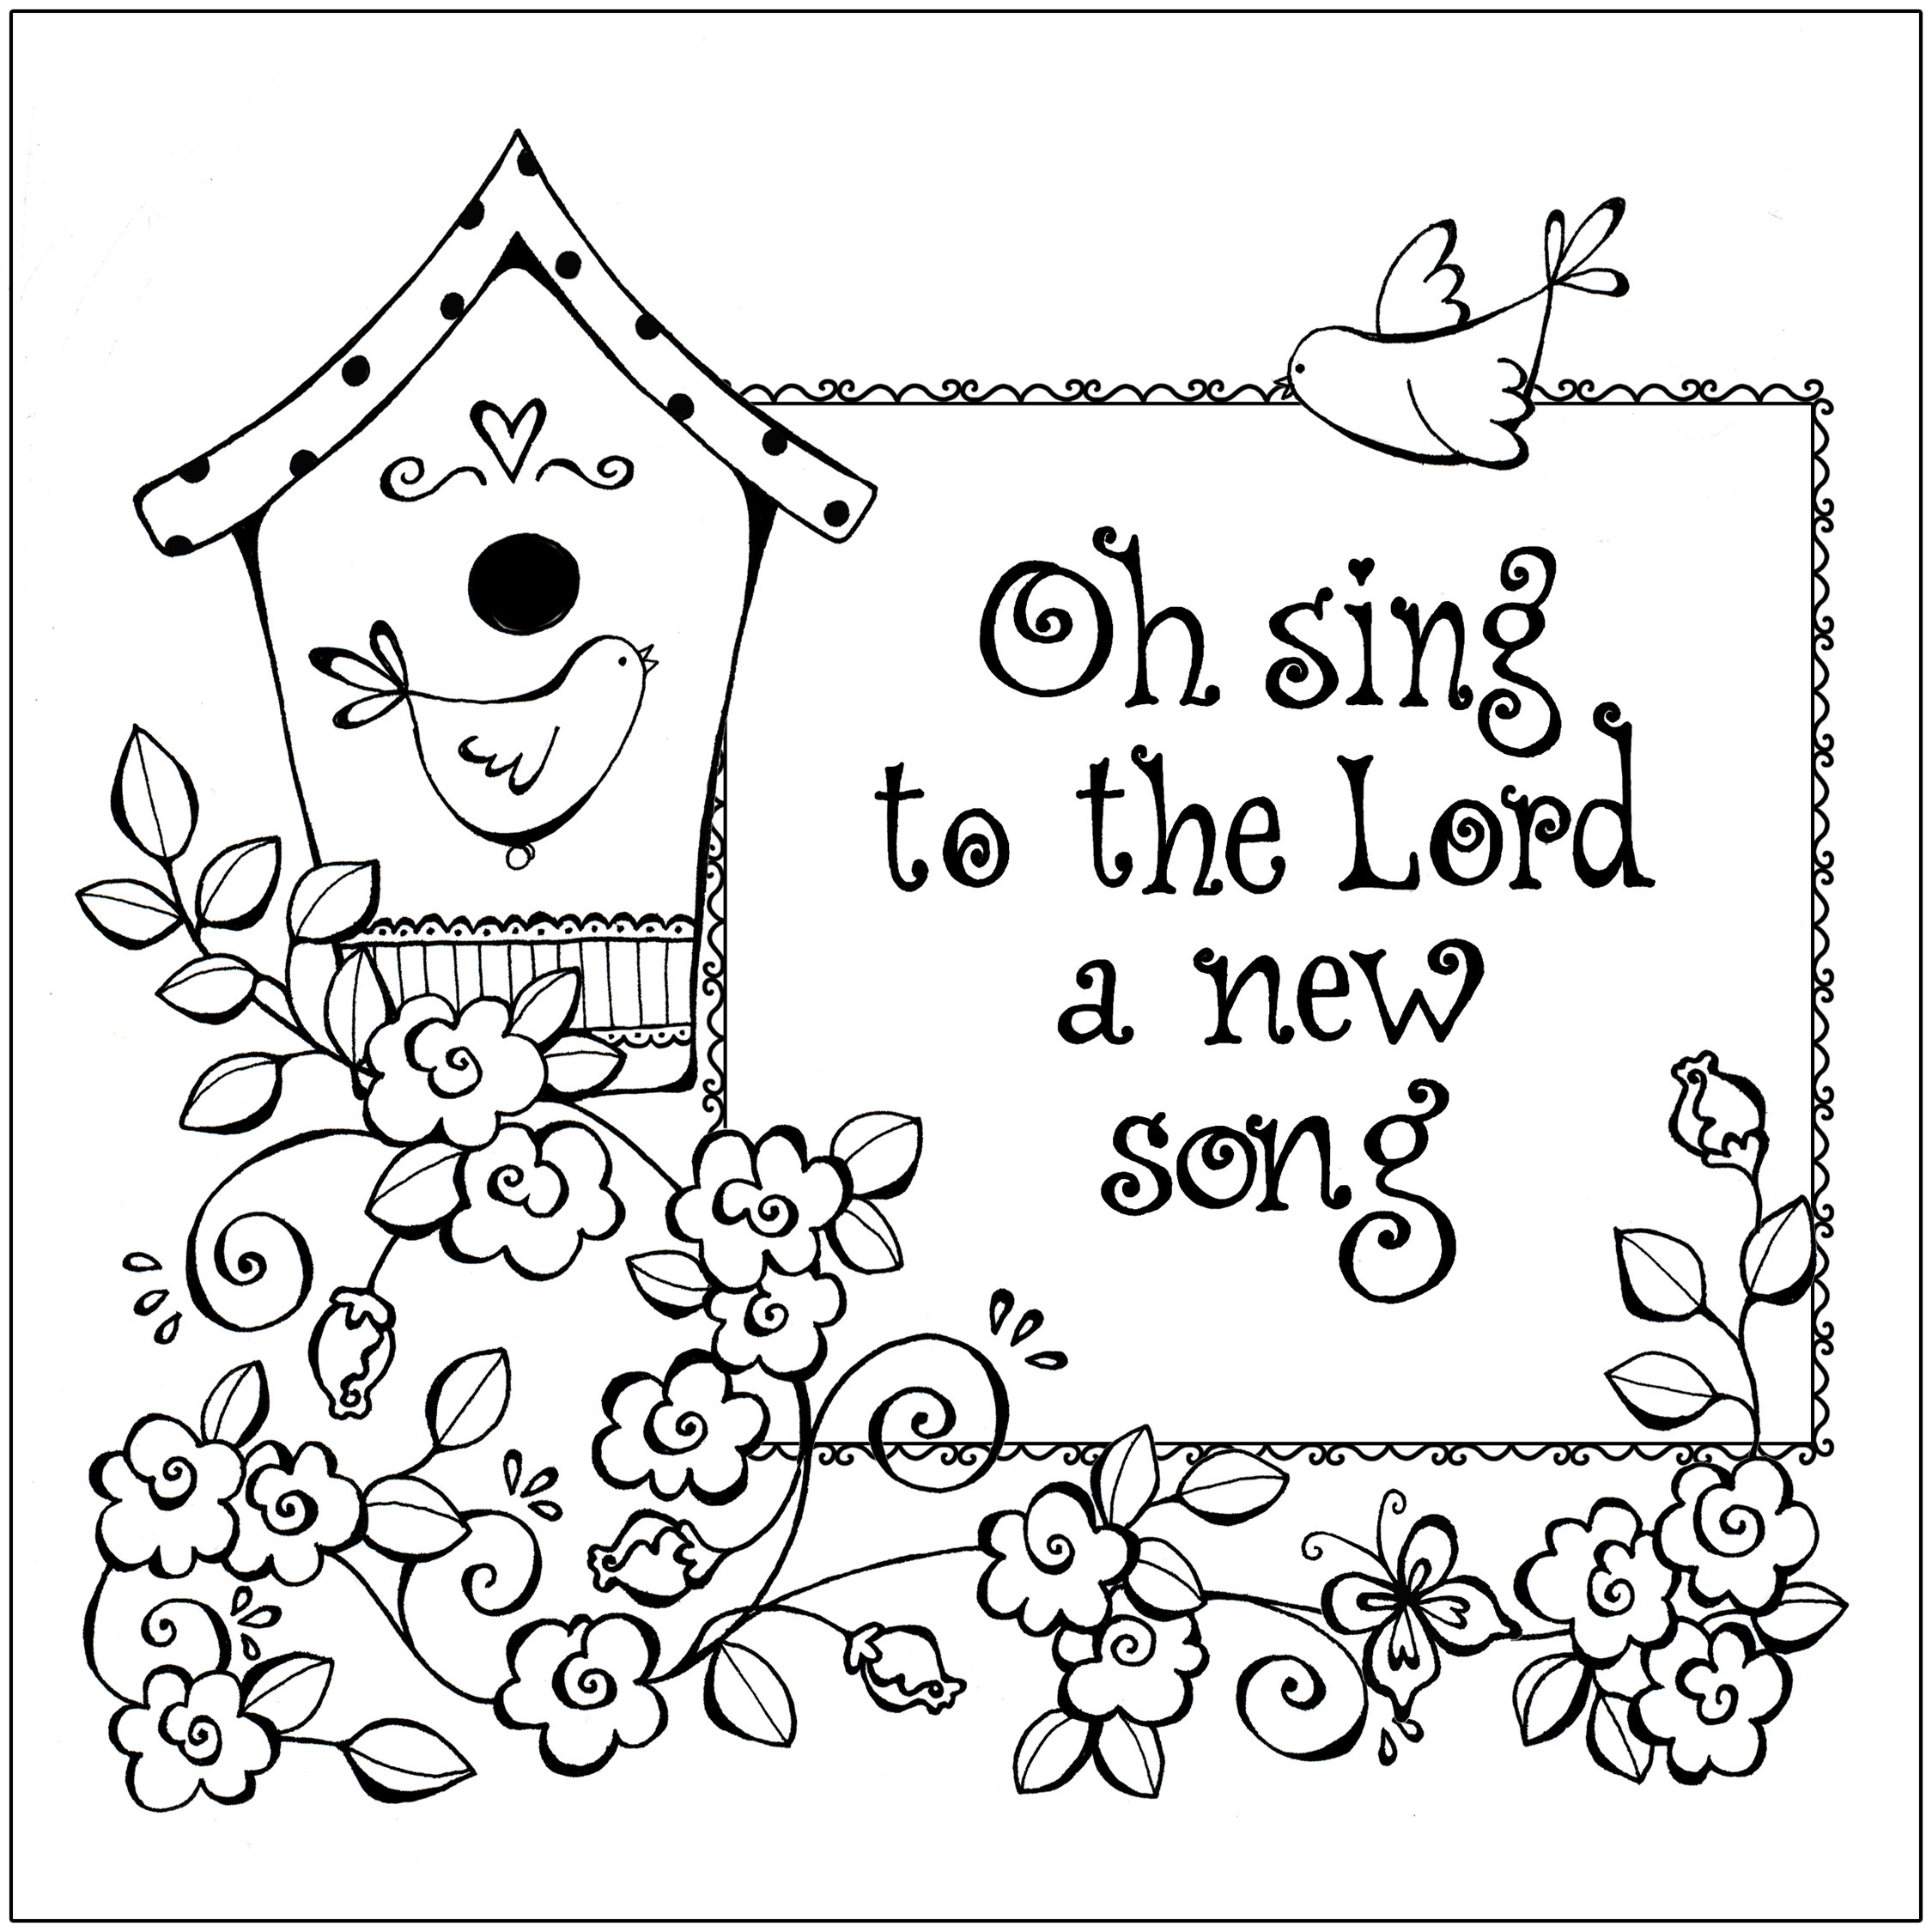 Kids Church Coloring Pages
 Free Printable Christian Coloring Pages for Kids Best